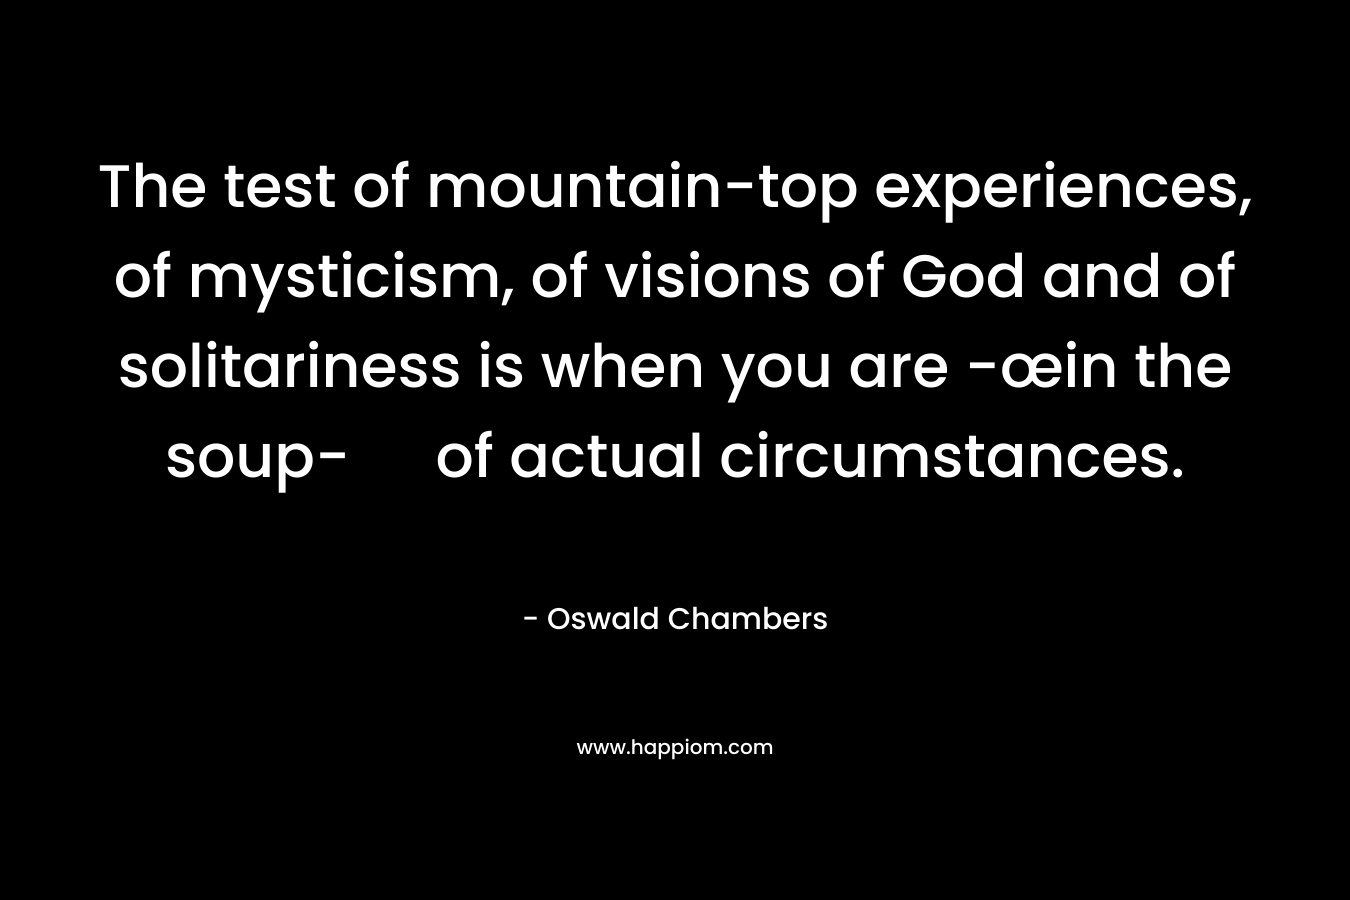 The test of mountain-top experiences, of mysticism, of visions of God and of solitariness is when you are -œin the soup- of actual circumstances.